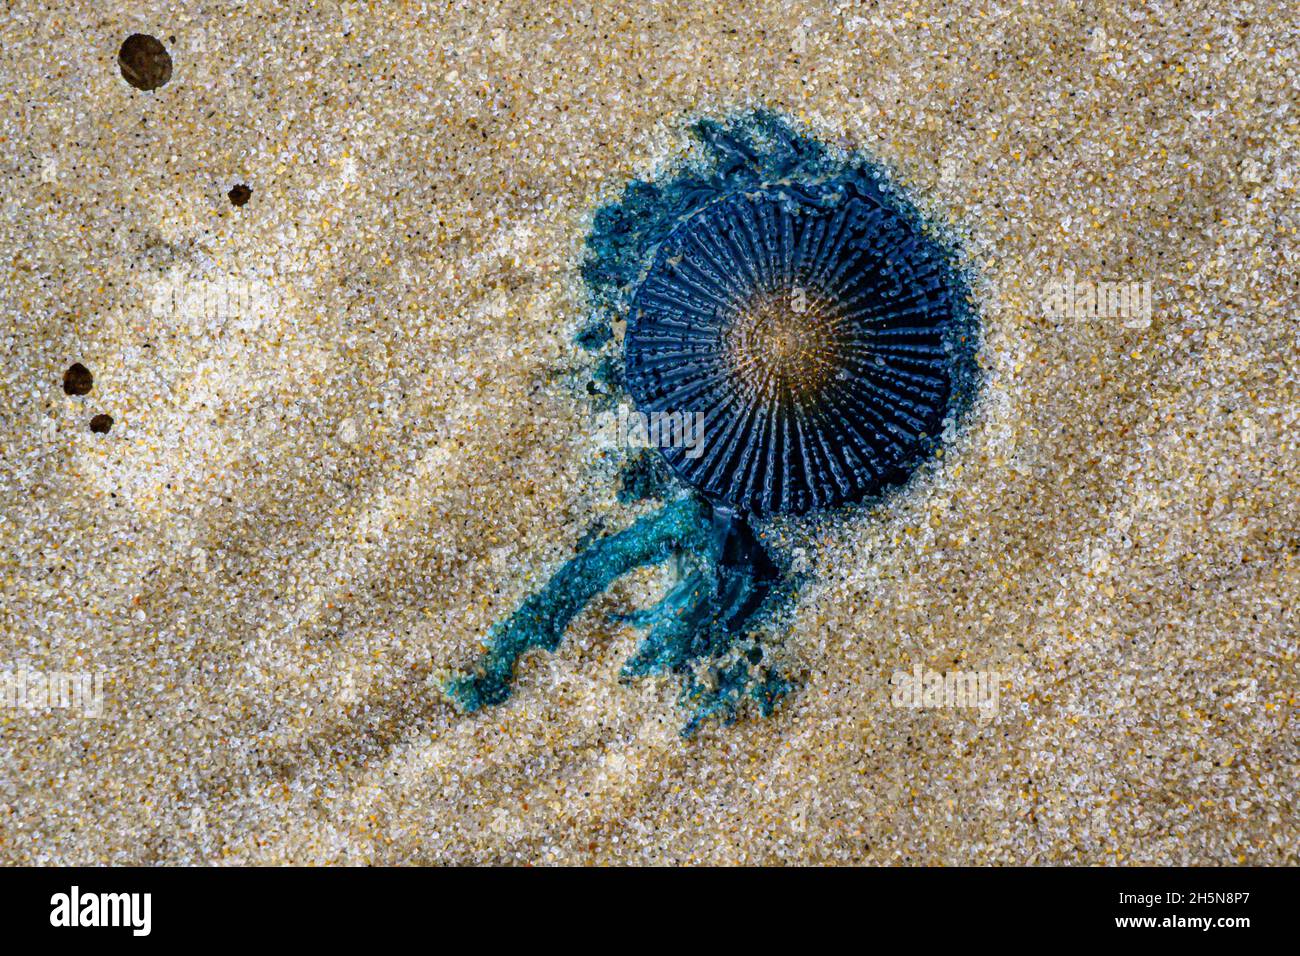 Porpita porpita, commonly known as blue button is a colony of hydroids. Not a jellyfish. (macro) Stock Photo